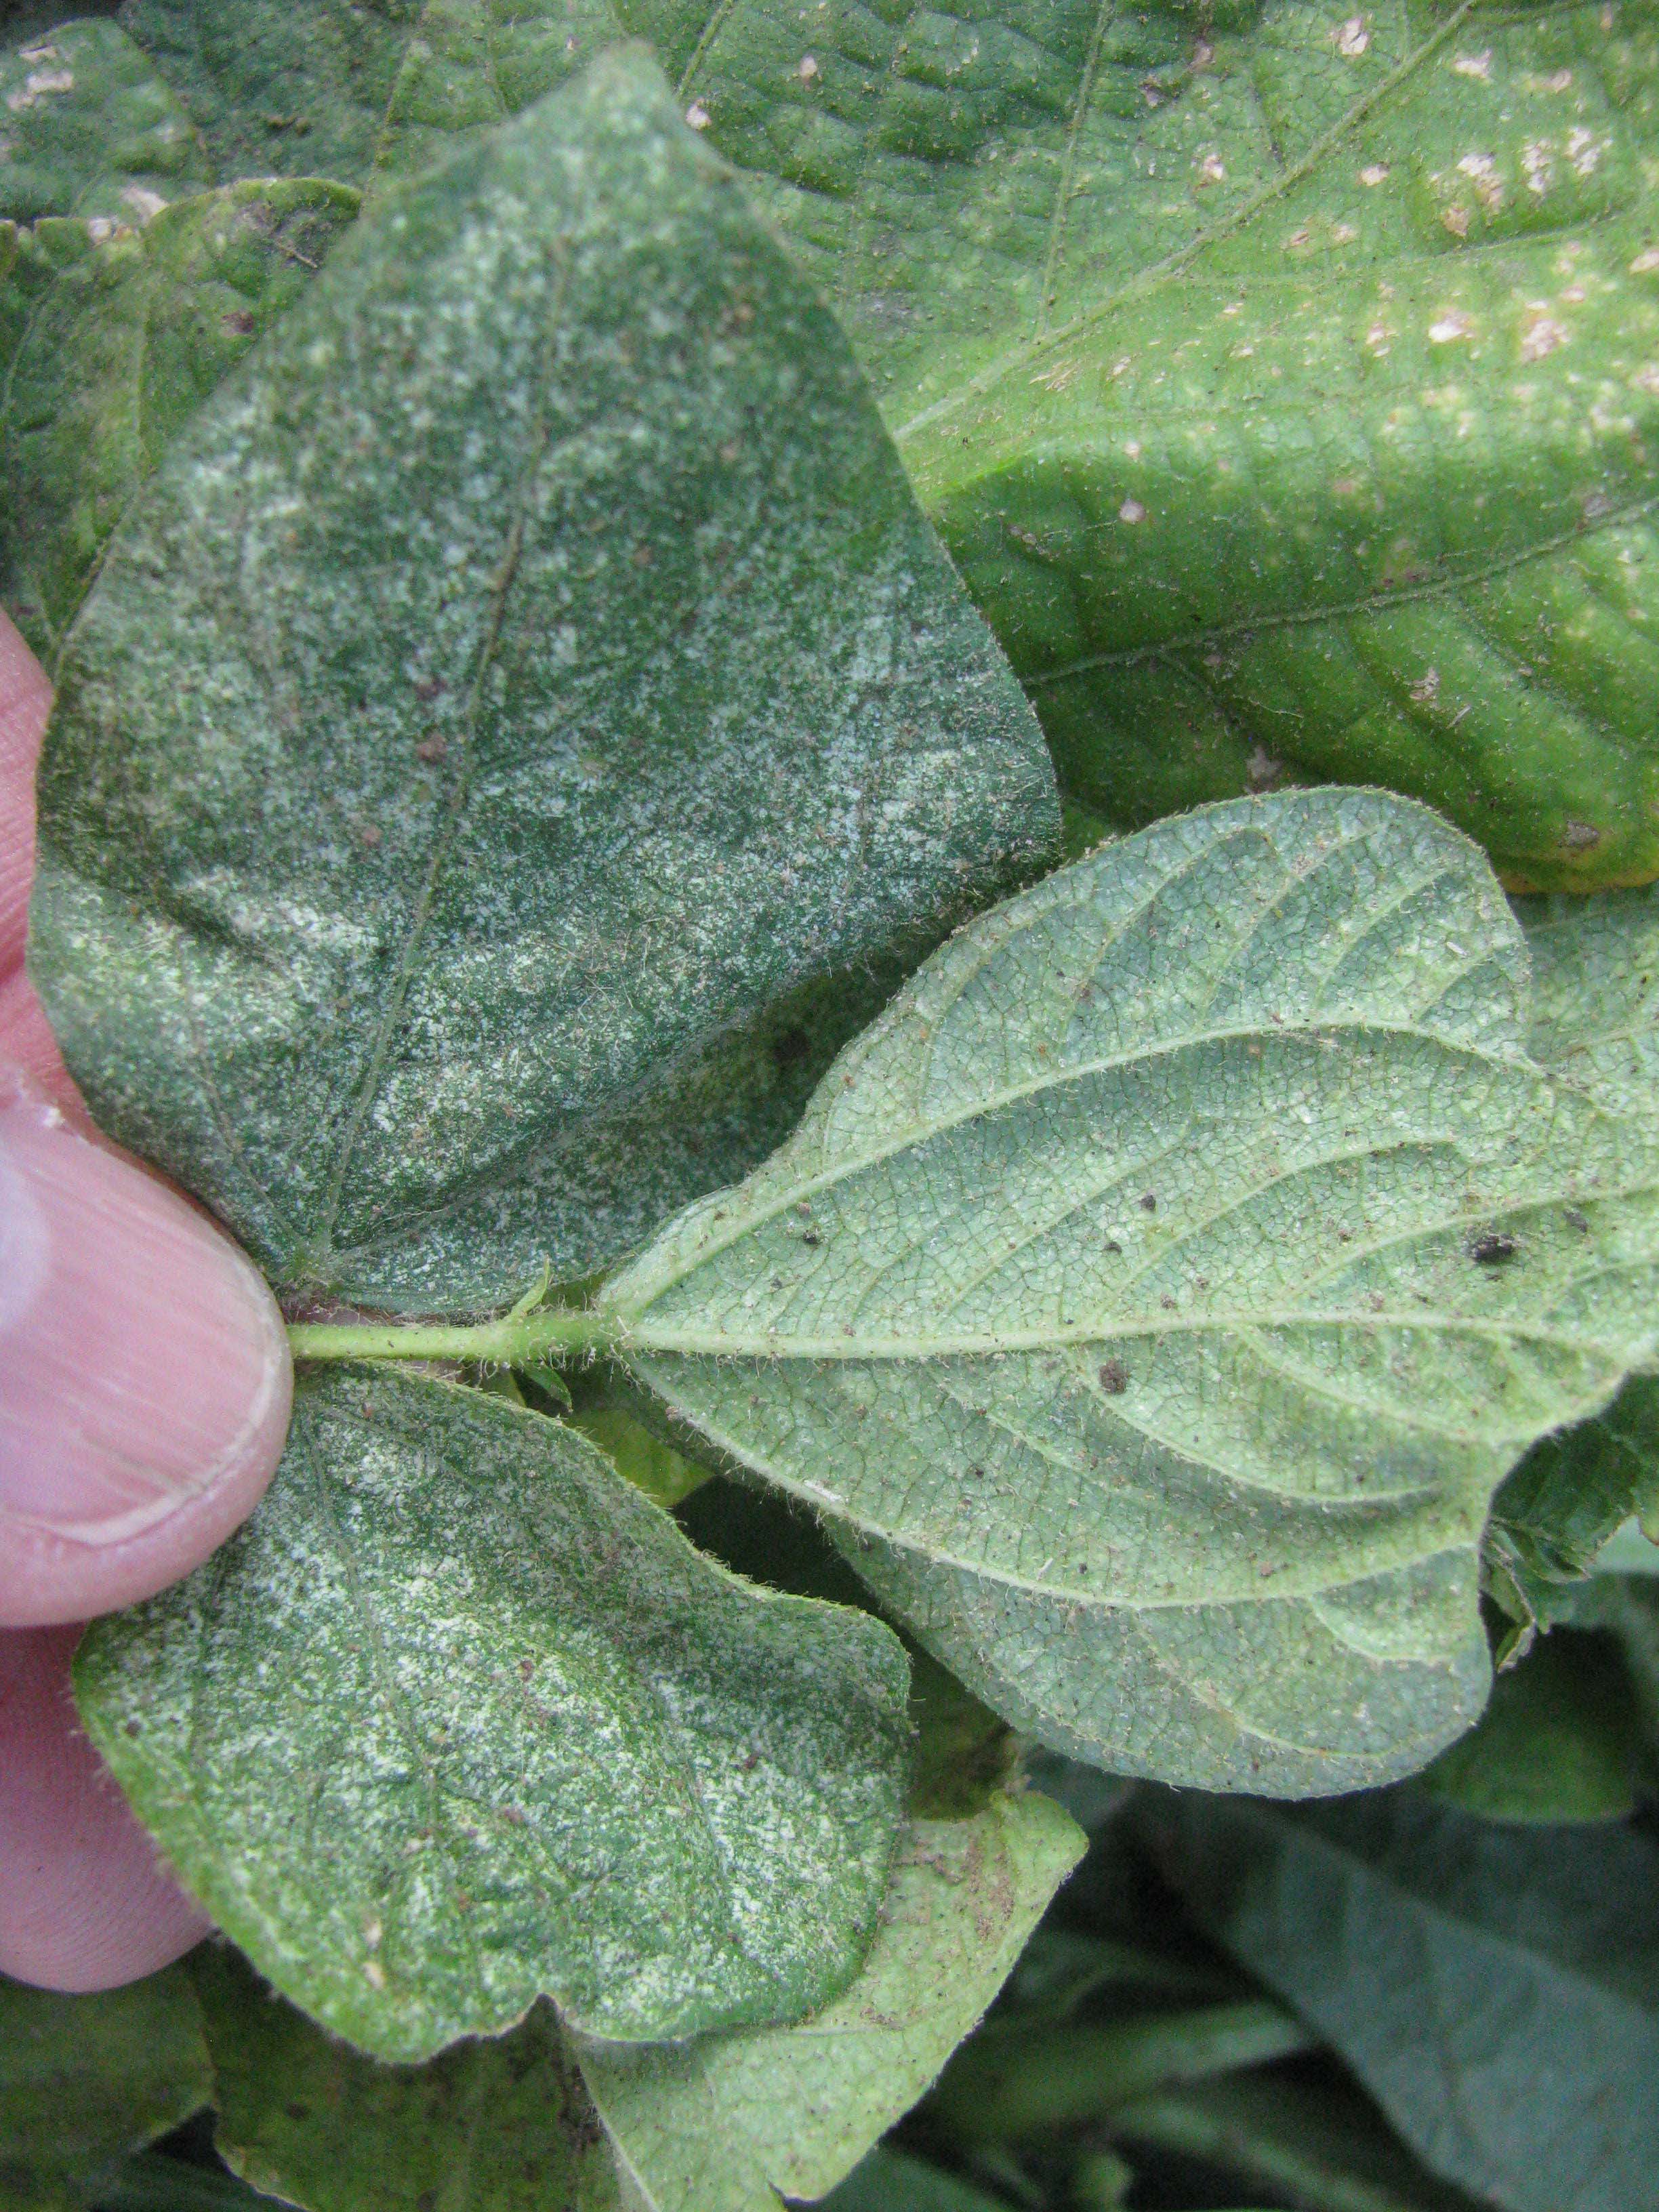 Severe spider mite infestation in an adzuki bean crop. Note the silvering of the lower leaf surface and white stippling on the upper surface of some leaves from a very dense population of spider mites feeding on these leaves.